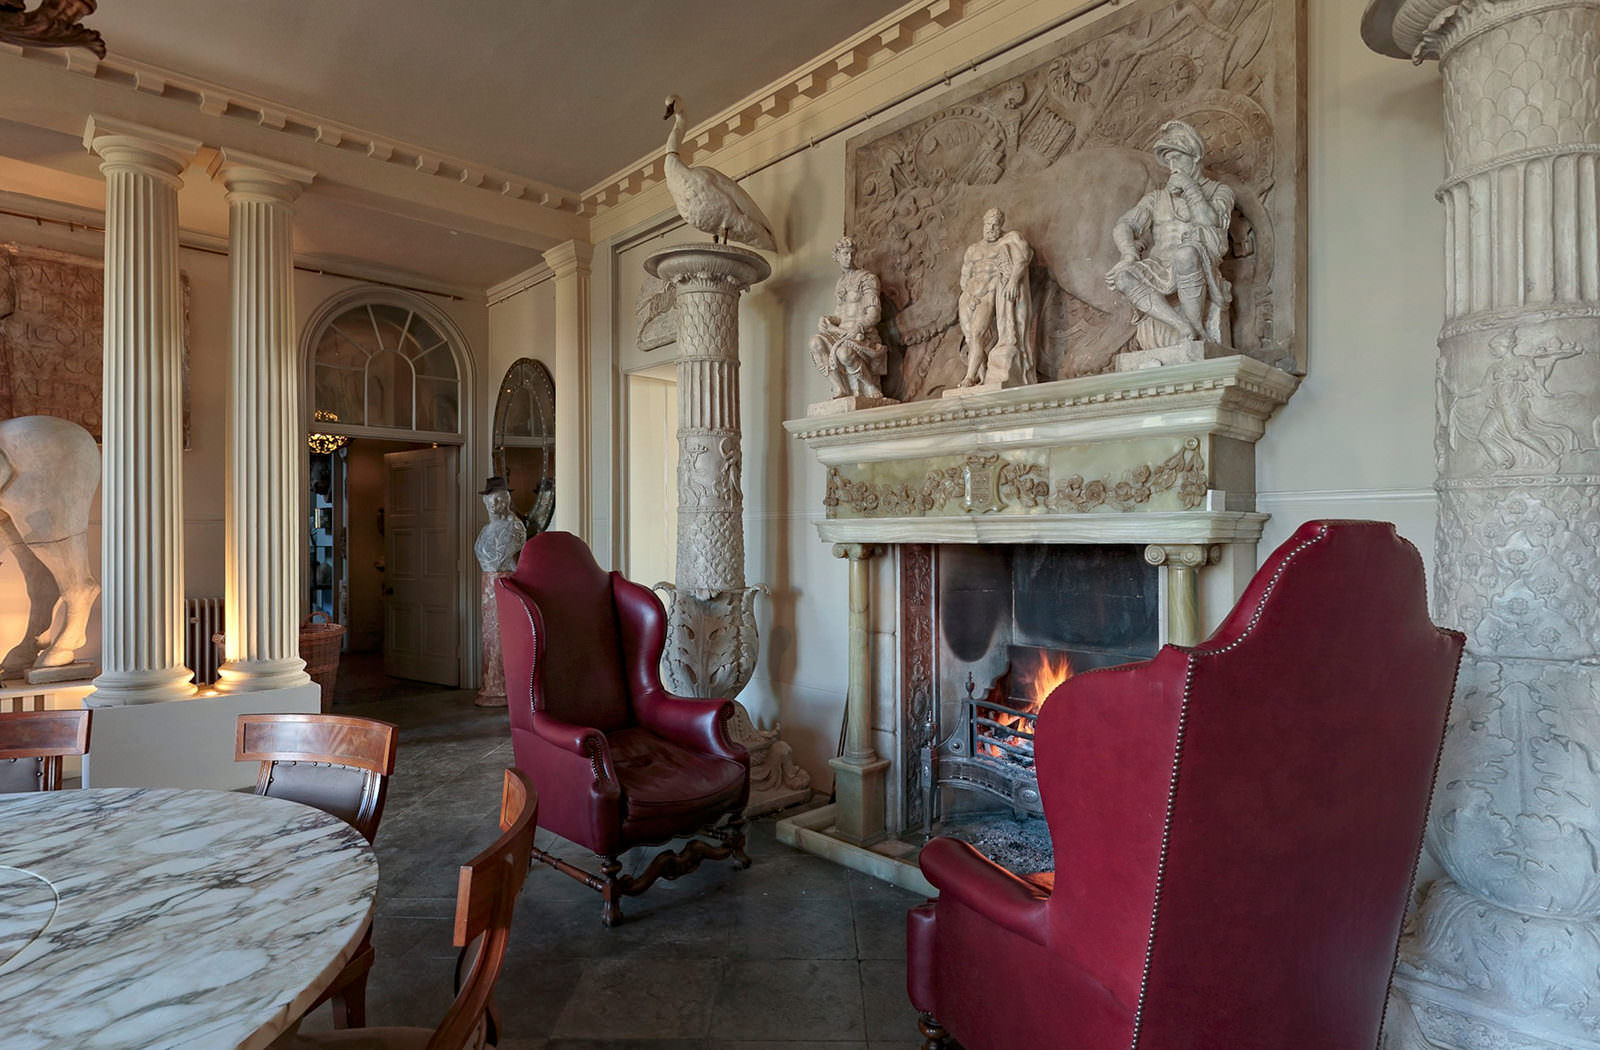 Aynhoe Park - still of the fireplace from the virtual tour